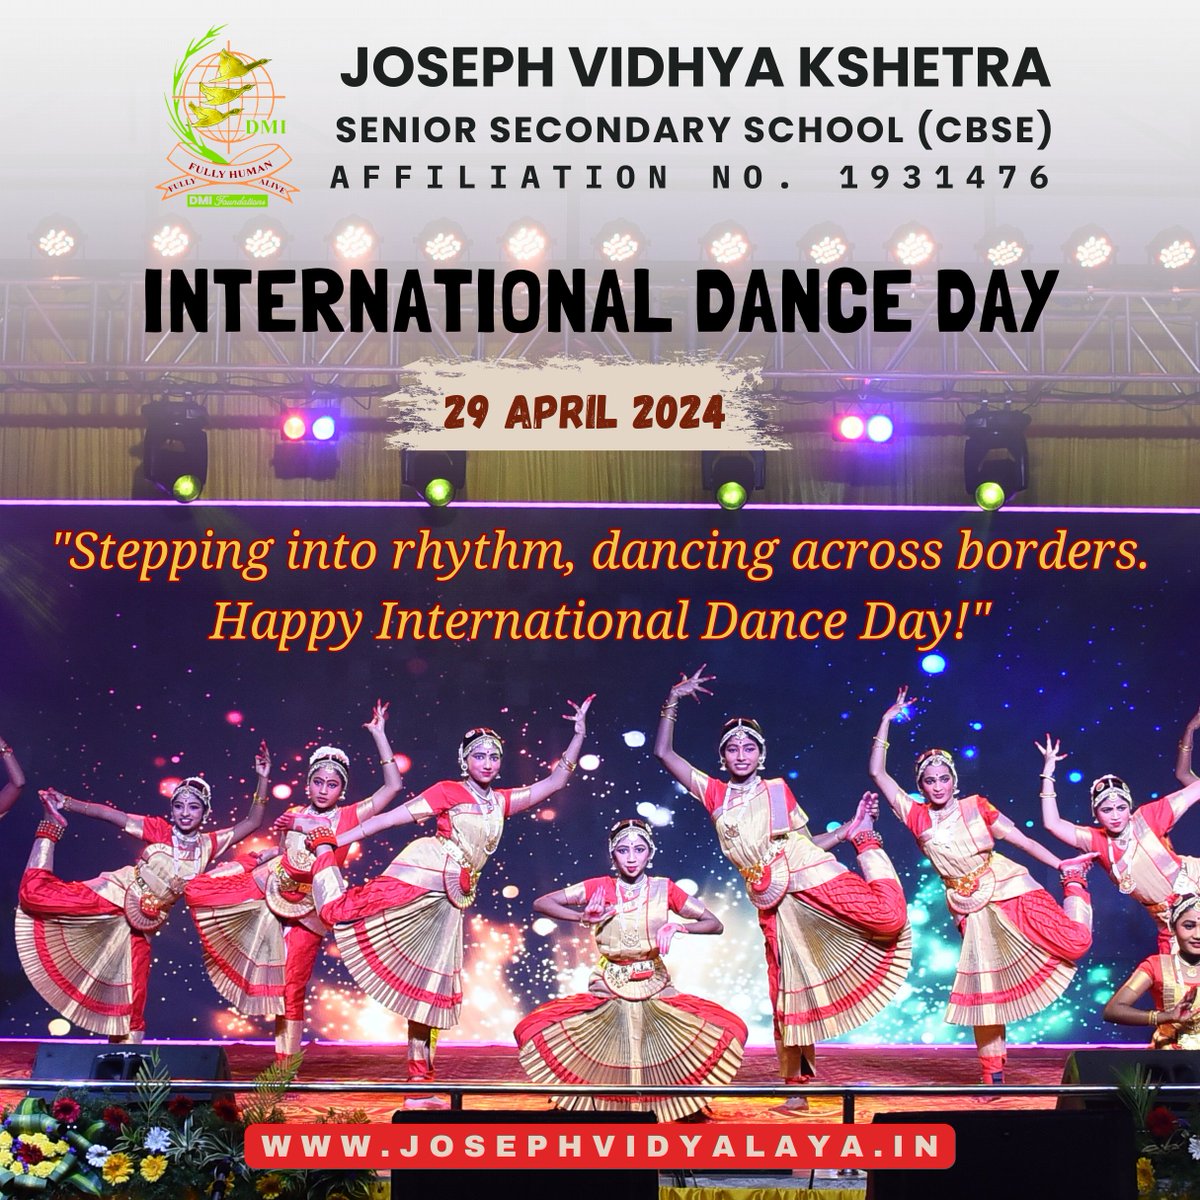 Let's dance together, across borders and cultures, uniting in joy, expression, and harmony. Happy International Dance Day!'

#InternationalDanceDay
#DanceDay
#GlobalRhythms
#DanceTogether
#CelebrateDance
#WorldOfDance